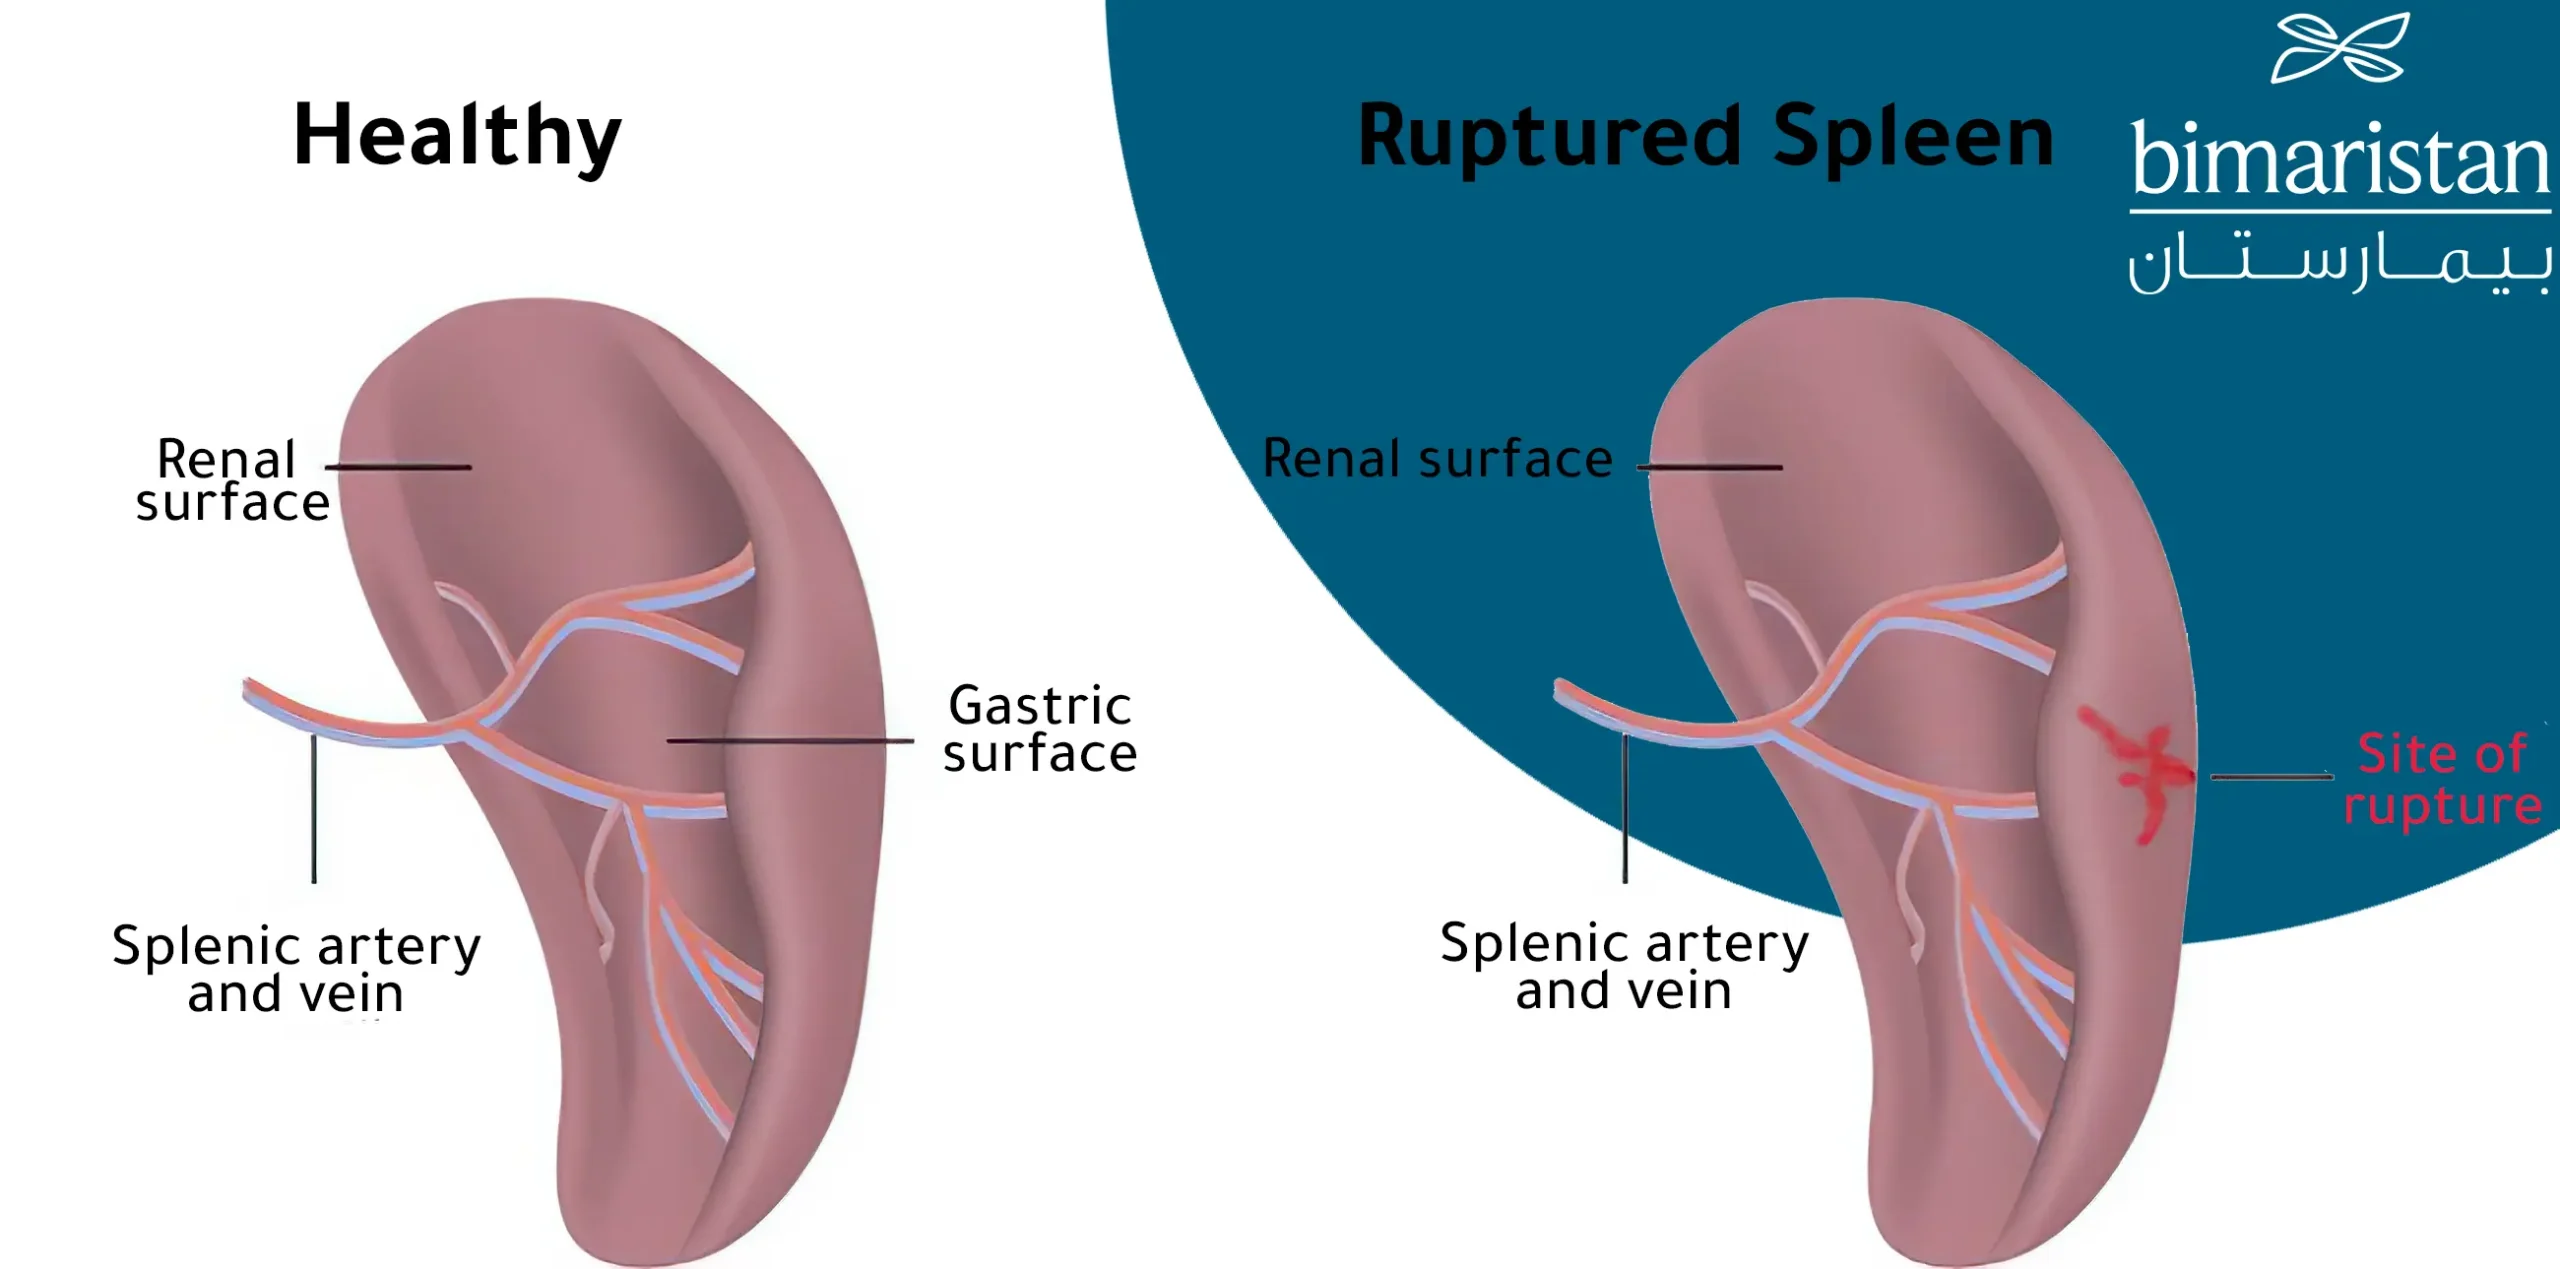 Image showing the difference between a normal spleen and a ruptured spleen